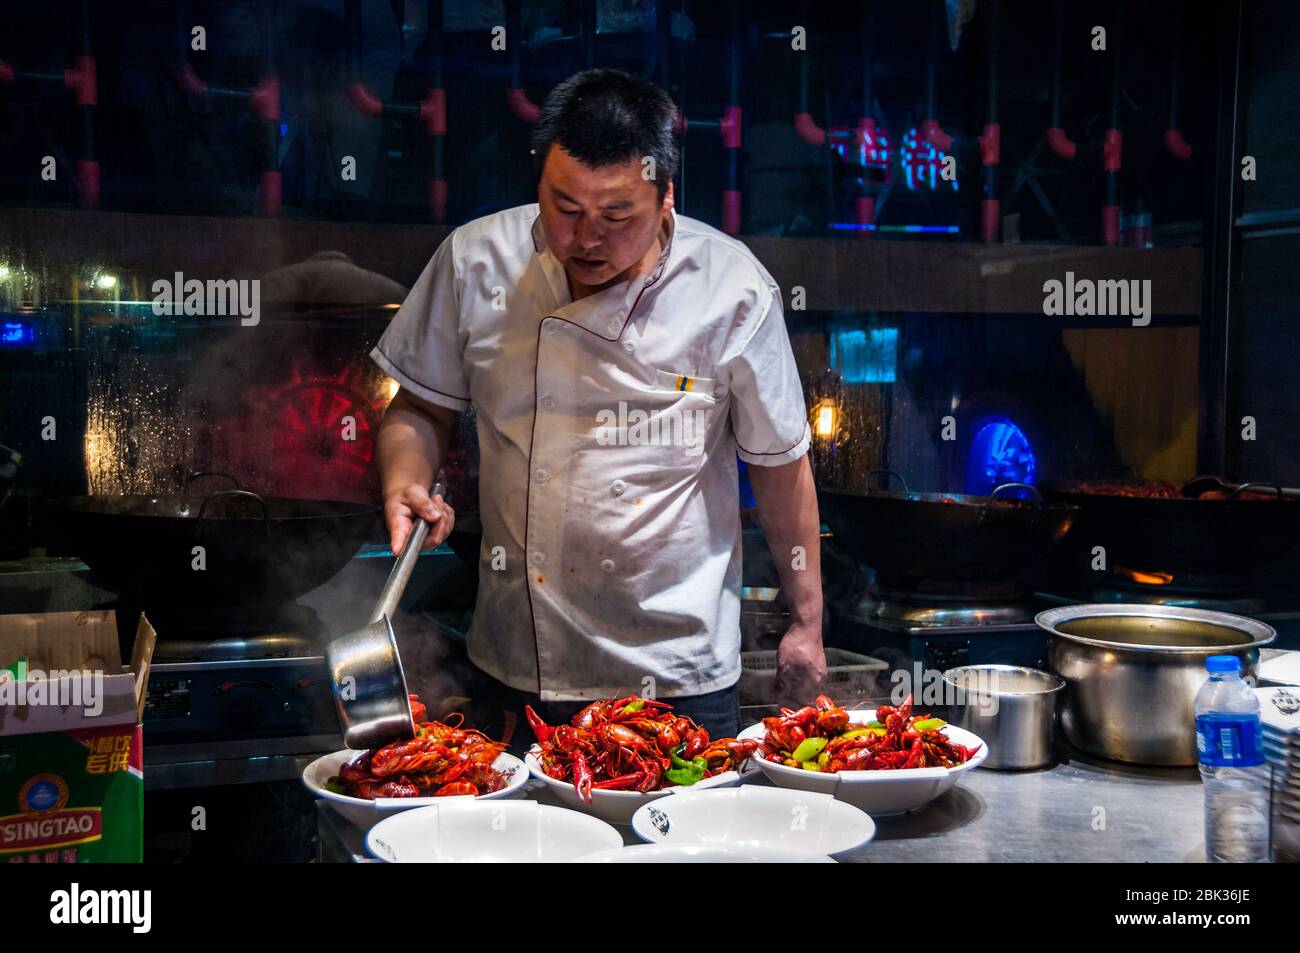 A chef plates up bowls of freshly fried crayfish (yabbies) on Shanghai's Shouning Road food street. Stock Photo